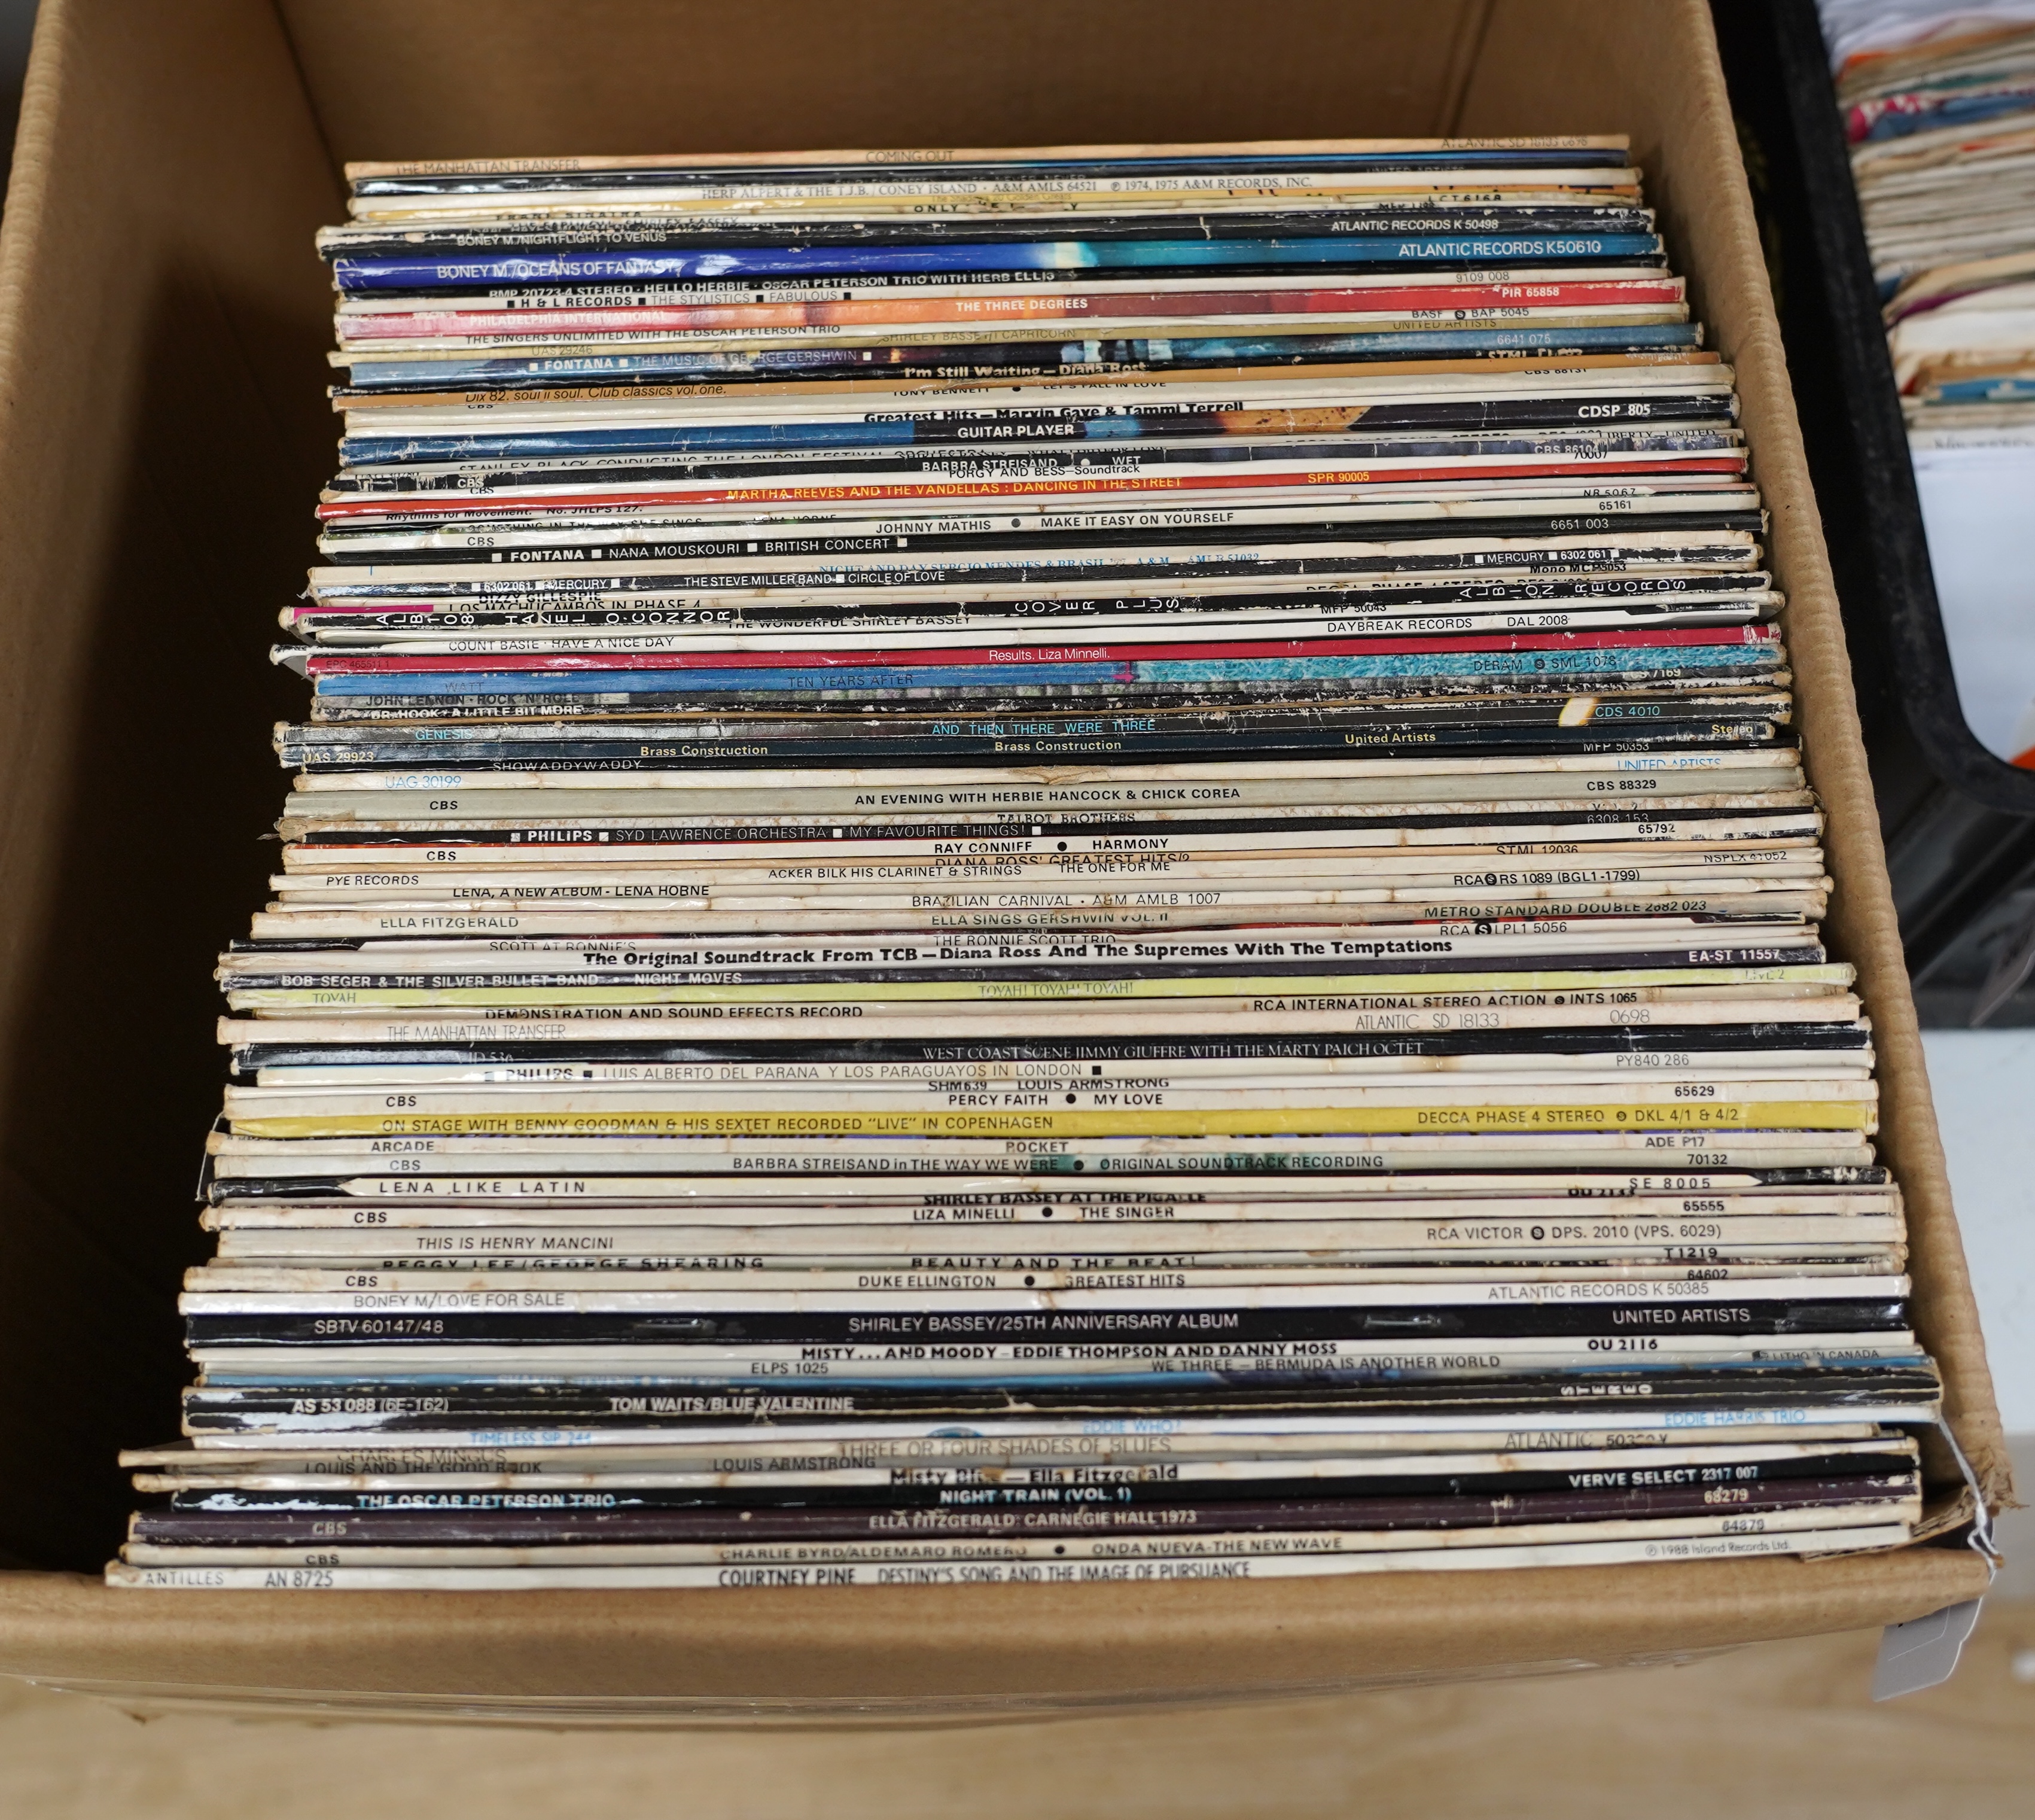 Eighty-two LP record albums including a number of jazz albums, artists include; Courtney Pine, Charlie Mingus, Shirley Bassey, the shadows, Boney M., Charlie Byrd, Oscar Peterson, Diana Ross, Ella Fitzgerald, Steve Mille